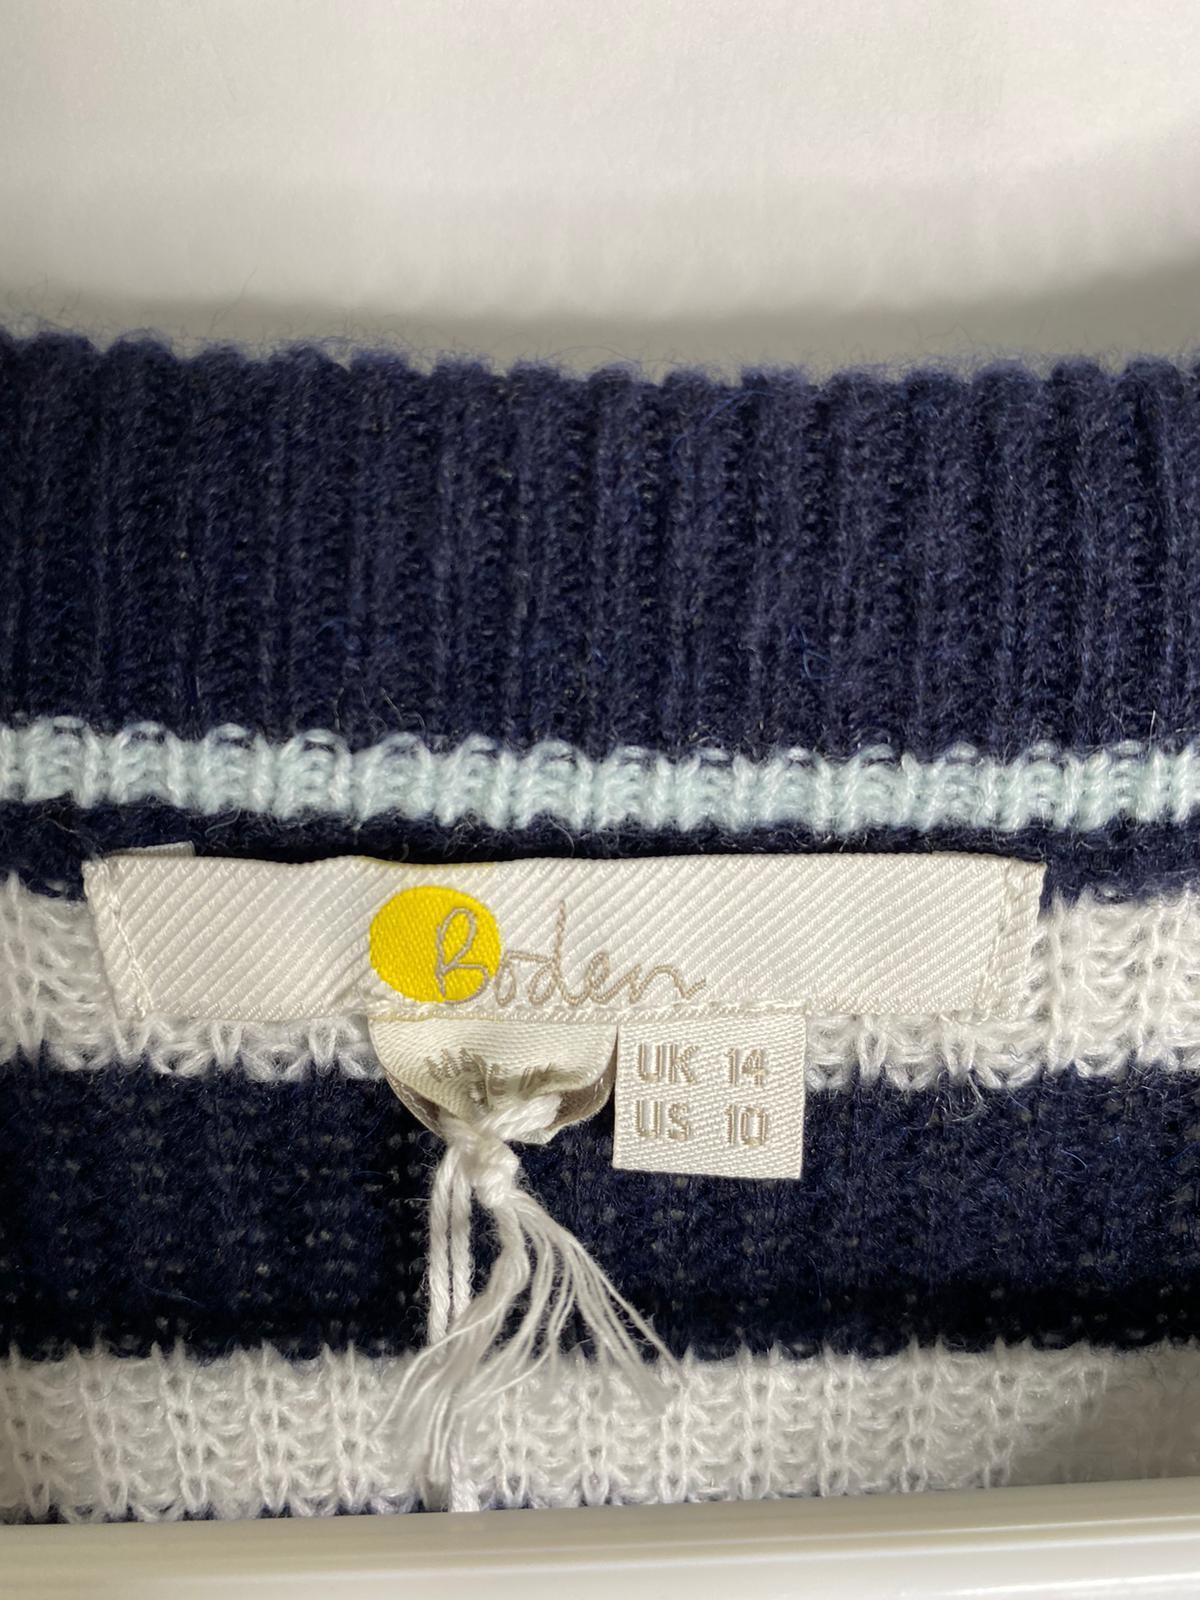 Boden Womens 10 Navy White K0486 Catherine Woven Fluffy Sweater Striped Broderie